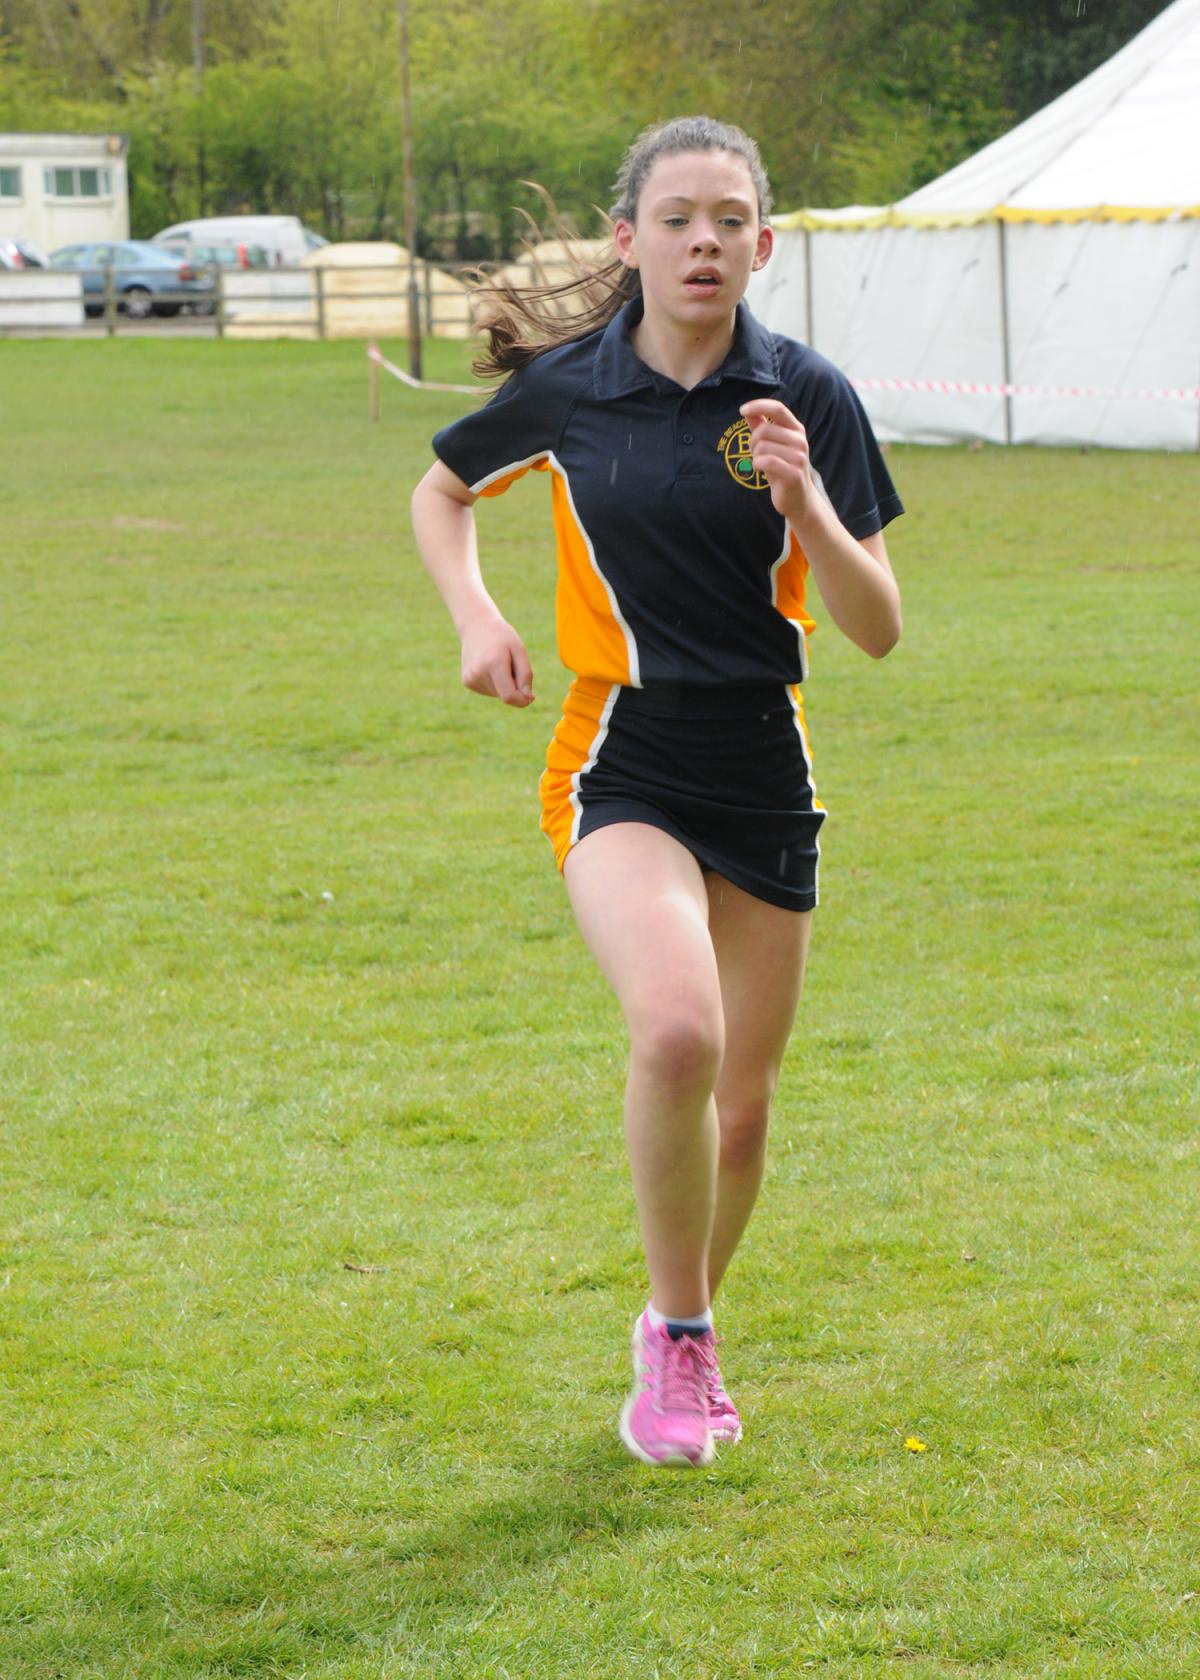 Beaconsfield Fun Run 2016 - Winner Grace Hudson. Picture by ARM Images.